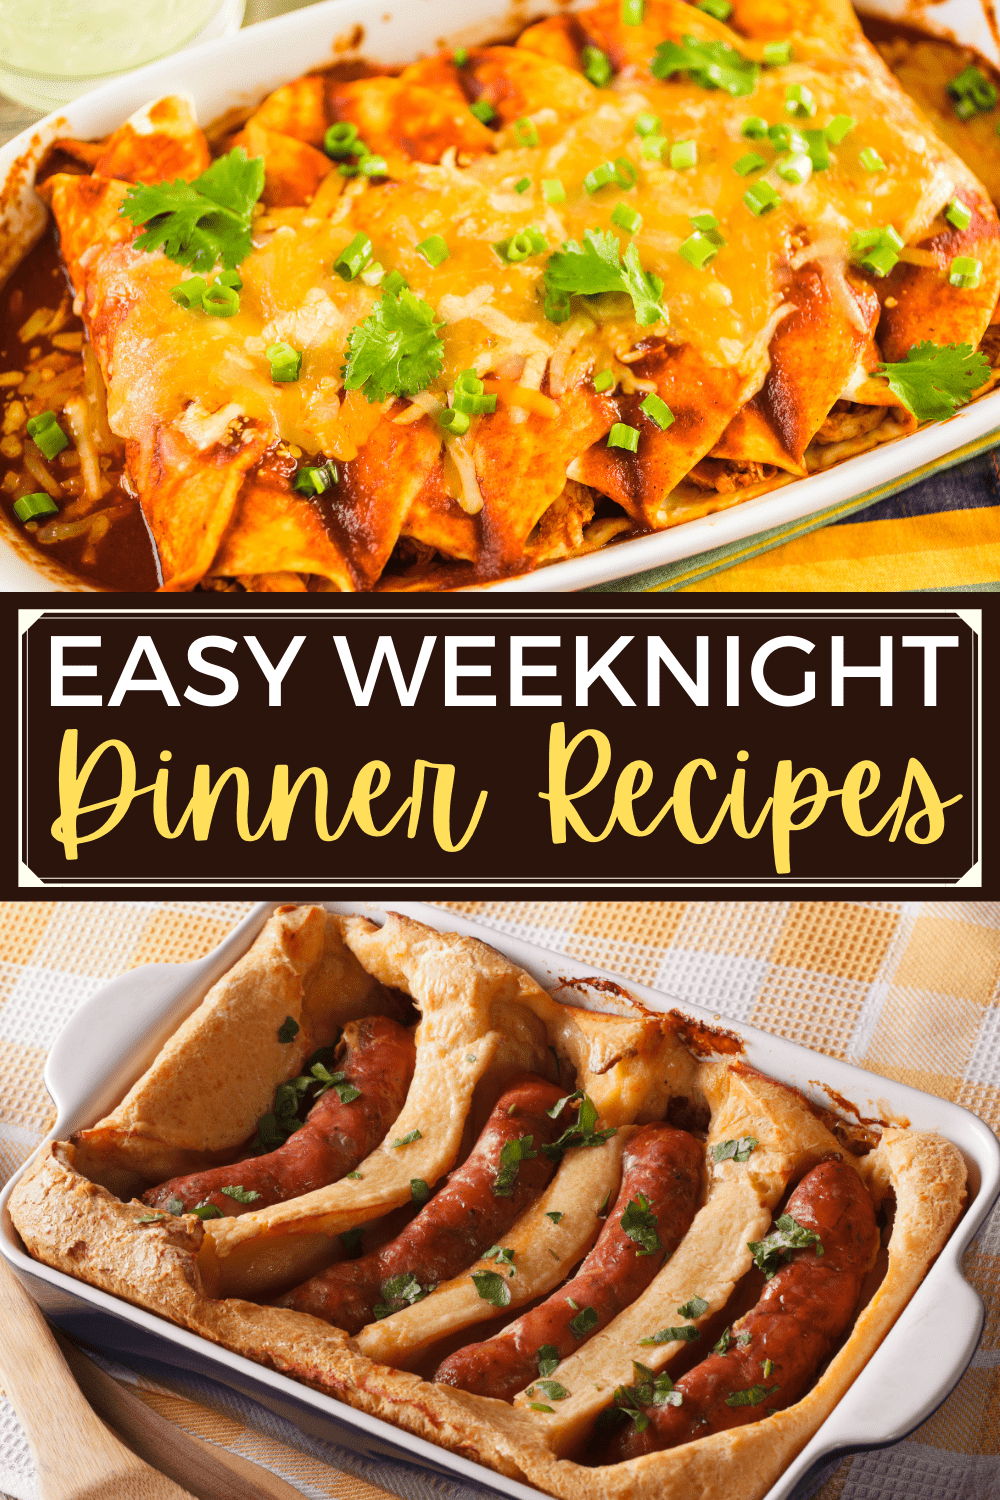 24 Fun Weeknight Dinners (+ Easy Recipes) - Insanely Good